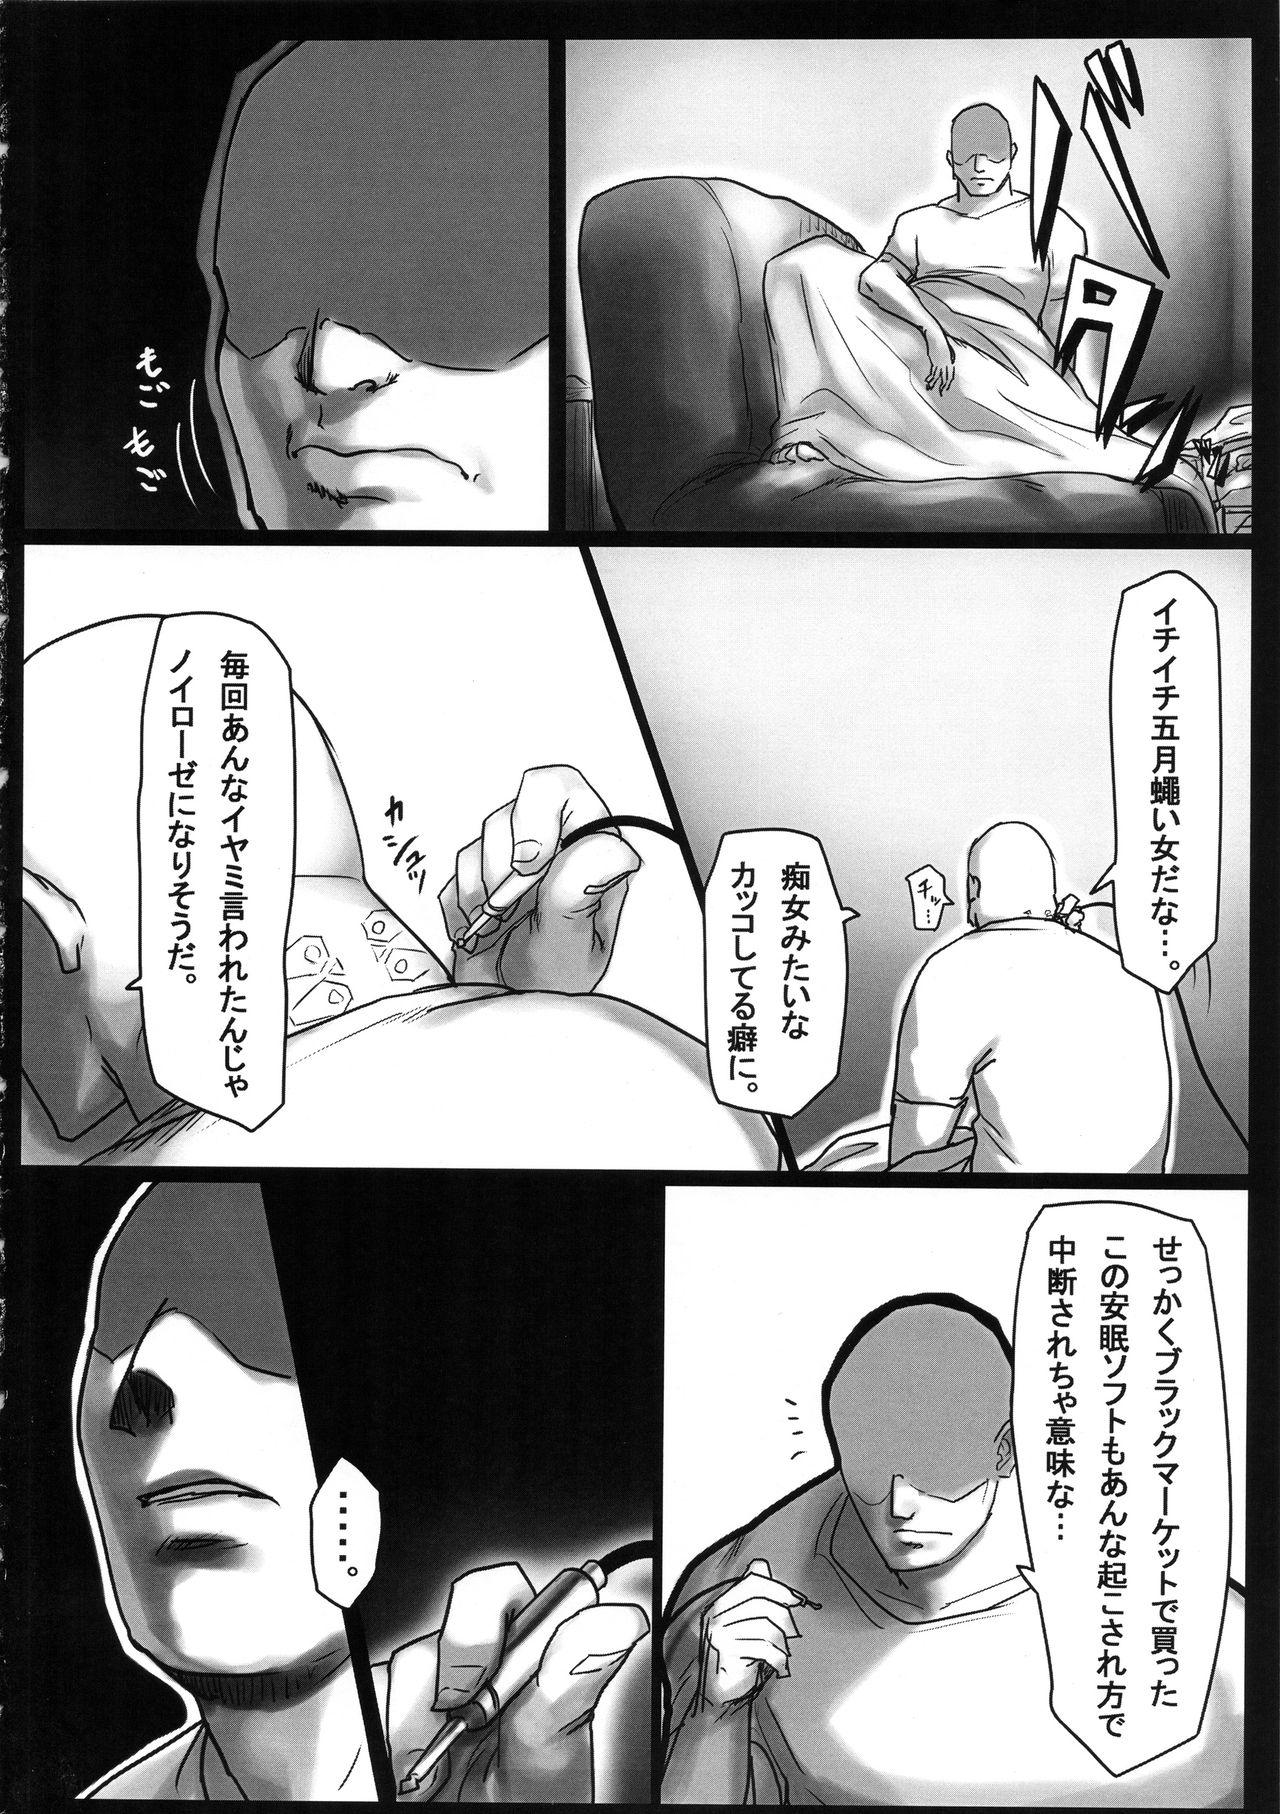 Goldenshower Kouin Mesu Gorilla - Ghost in the shell Ejaculation - Page 7